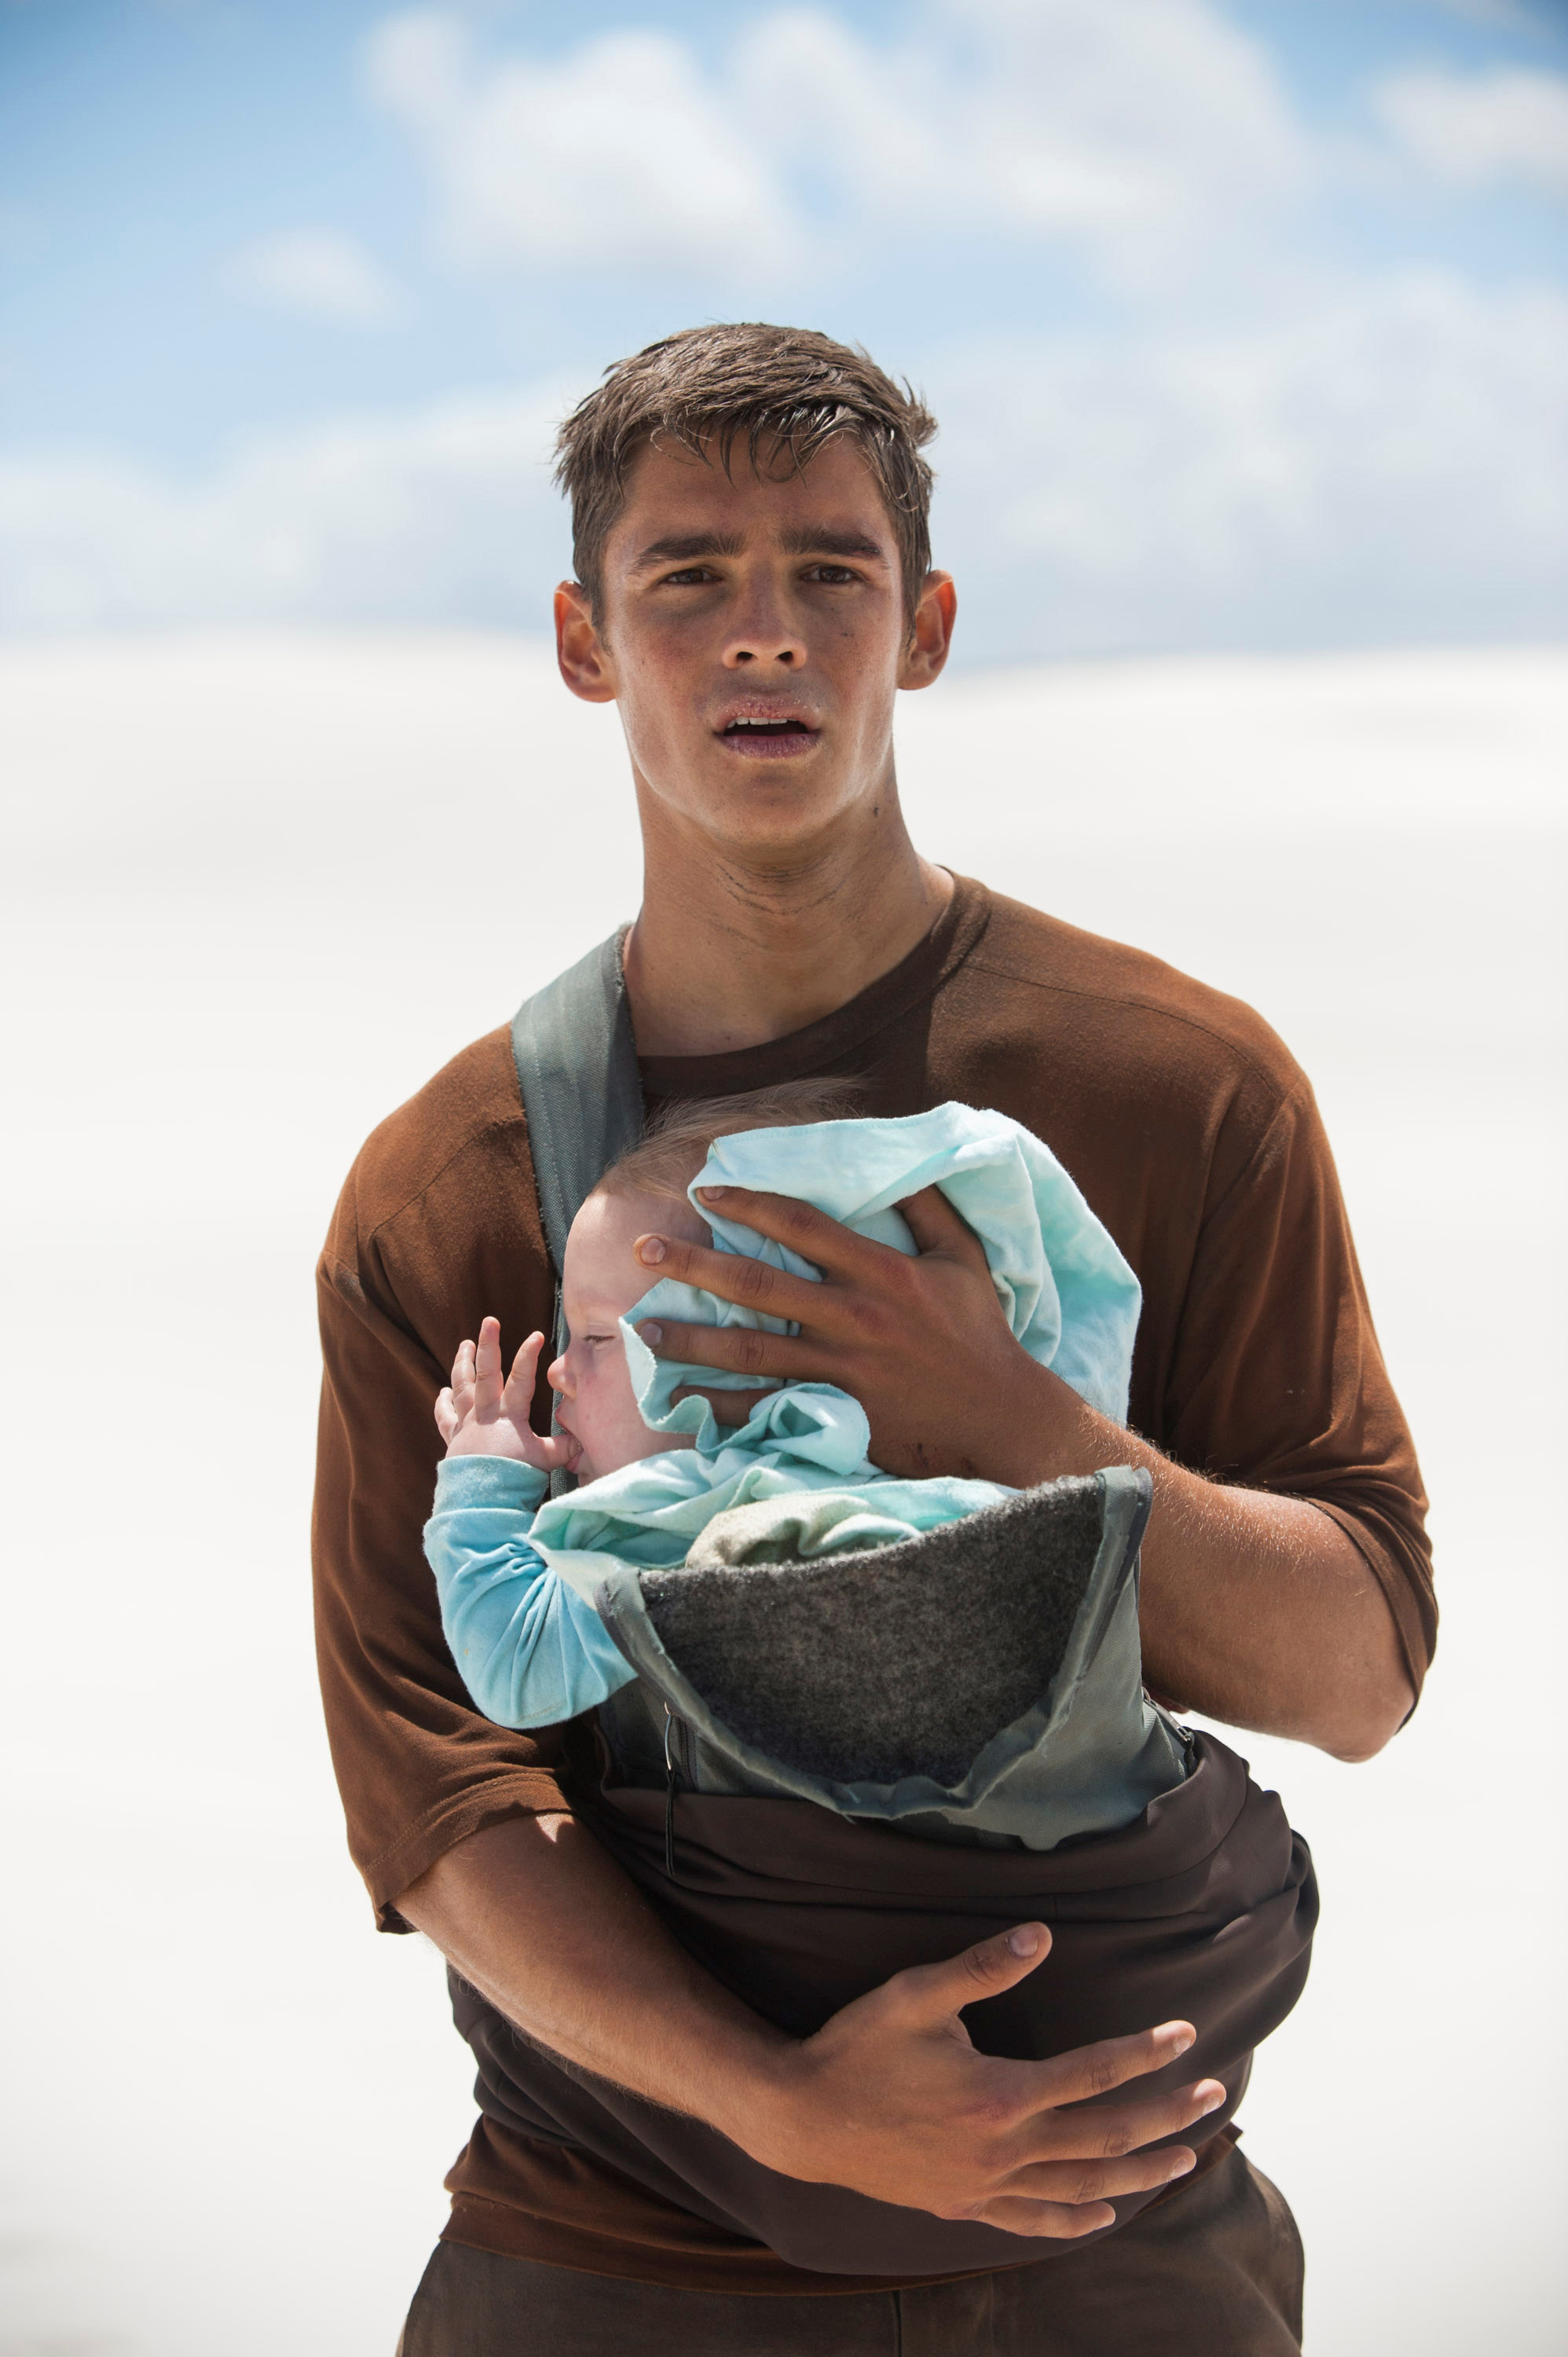 a young man carrying a baby and looking distressed